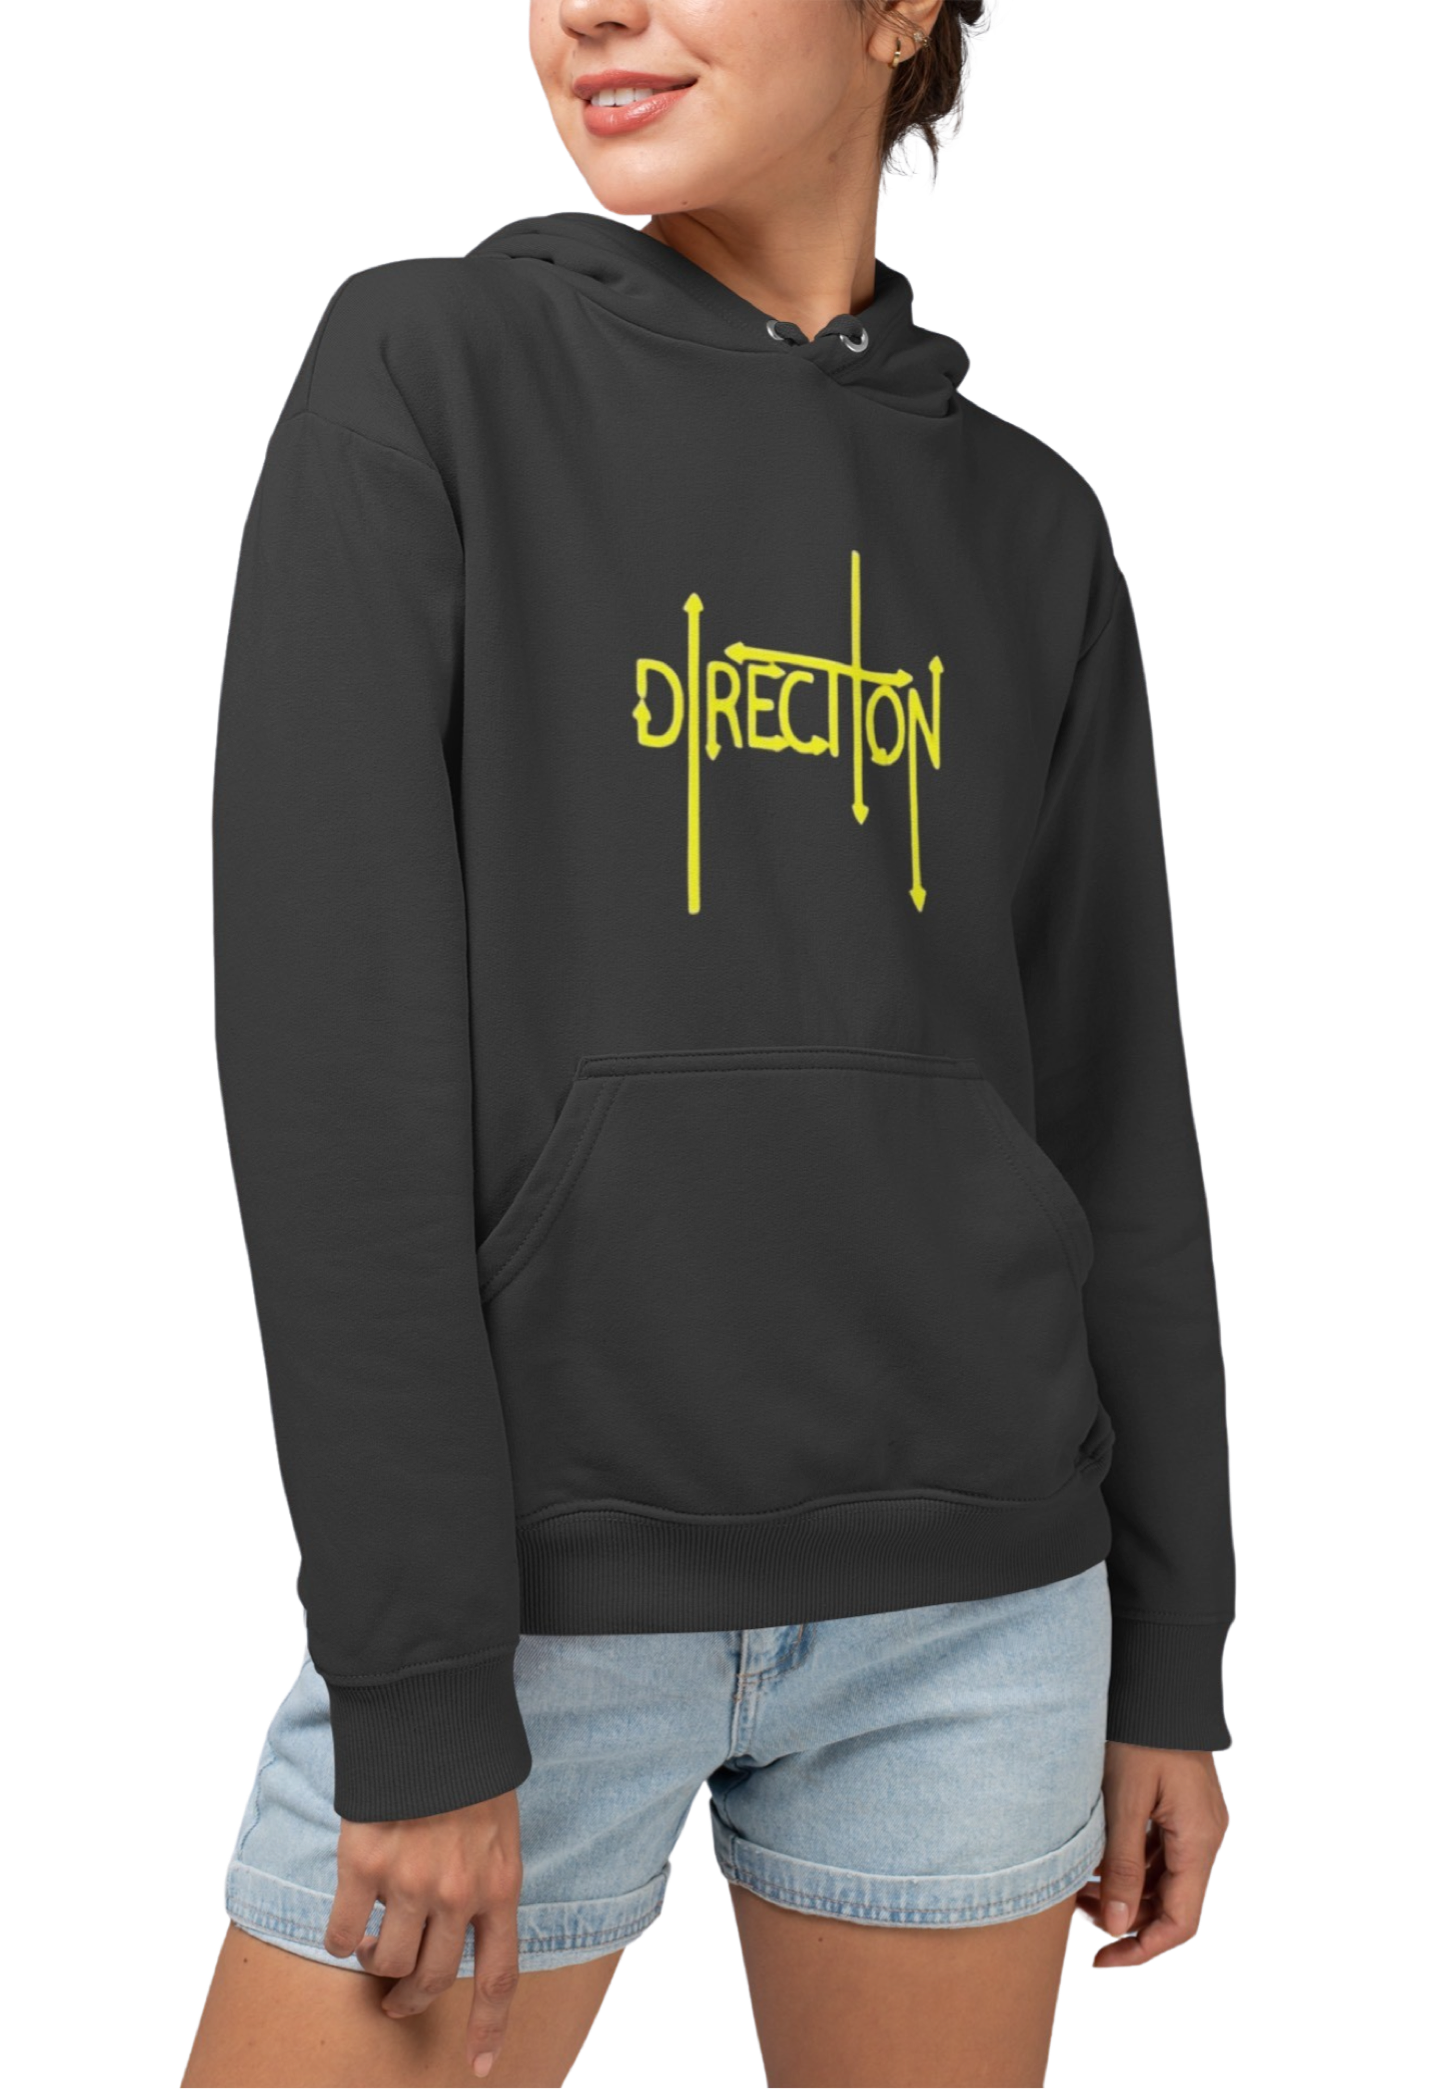 Women's 50% Cotton 50% Polyester DIRECTION Hoodie